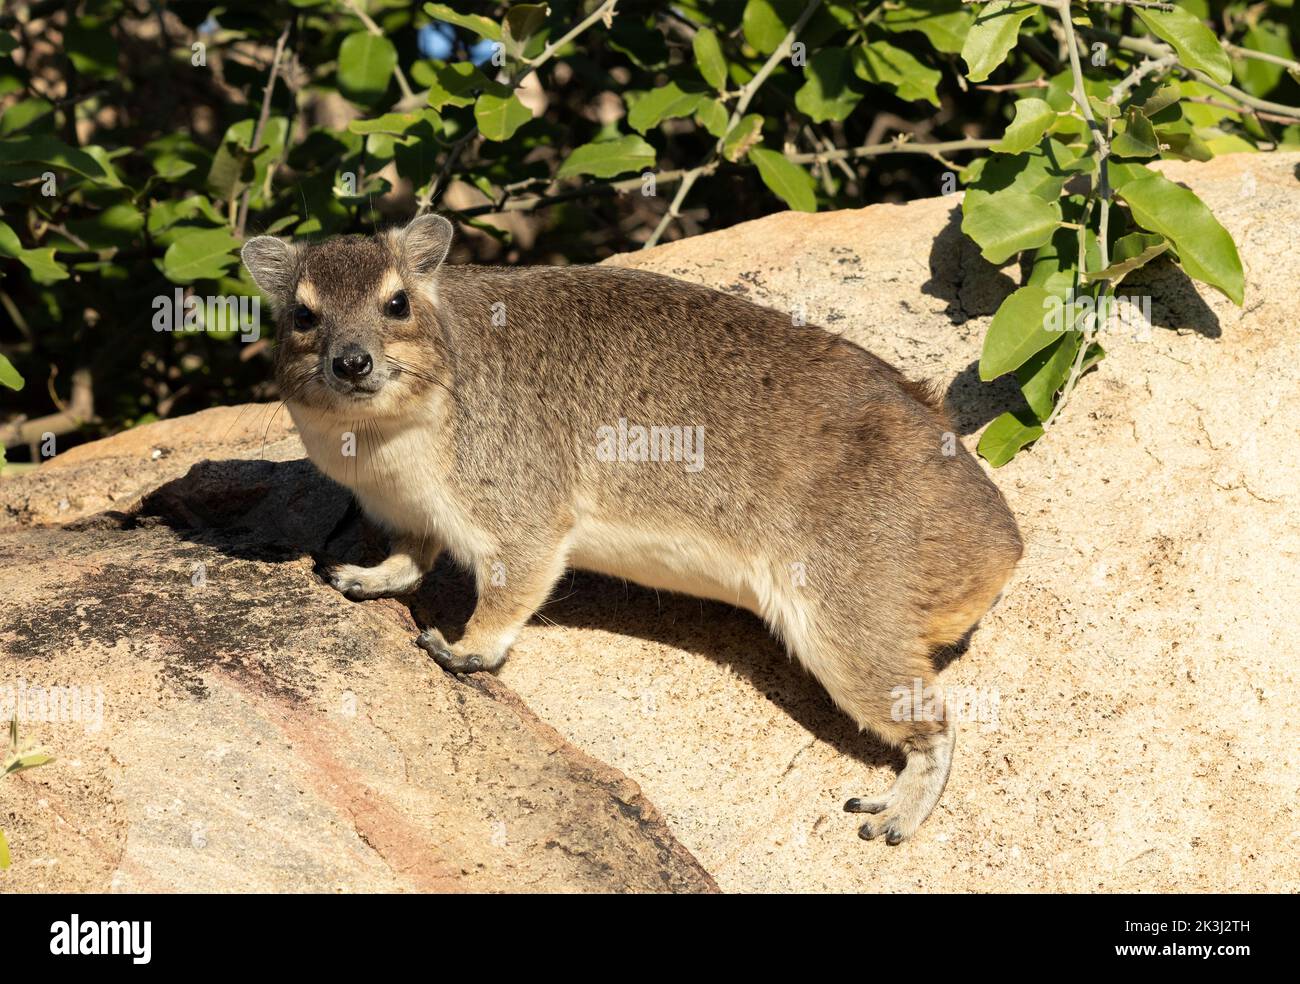 The Bush Hyrax is notorious for its poor heat regulating and will spend a lot of time sunbathing to warm up, especially after cold winter nights. Stock Photo